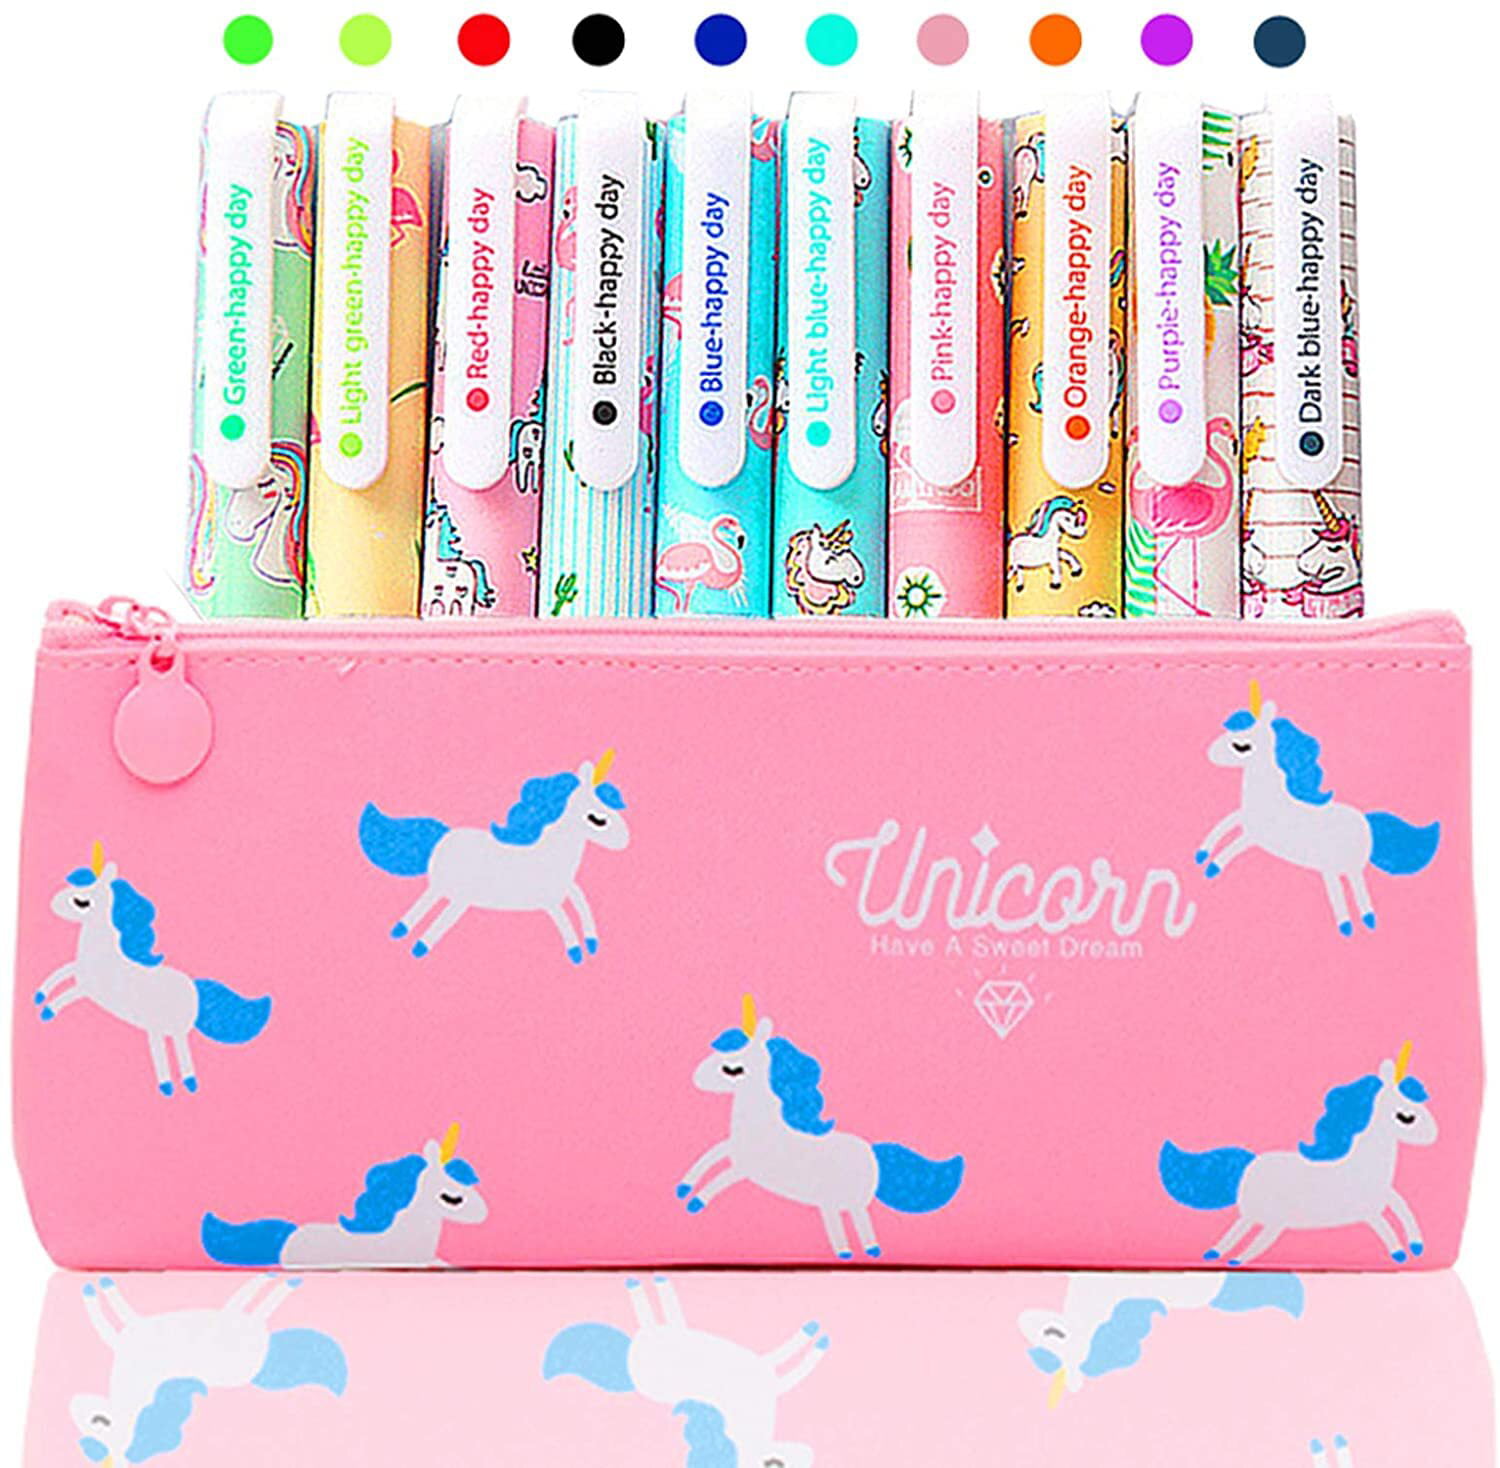 Sytle-Carry Stationery Set Unicorns Gifts, 50 Pcs Filled Stationery with  Unicorn Pencil Case Coloring Books Colored Pens Stickers, Arts and Crafts  for